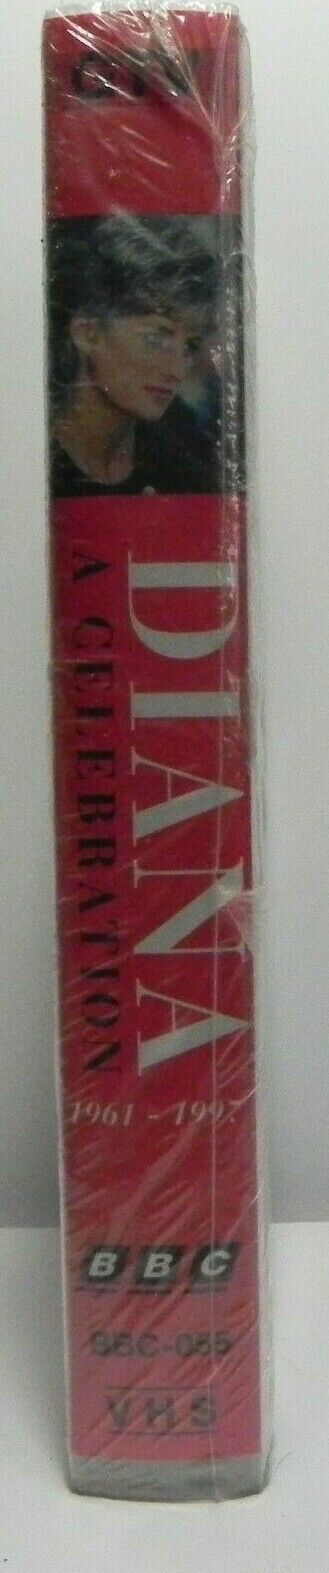 Diana: A Celebration - Large Box - Official BBC Bideo - Brand New Sealed - VHS-